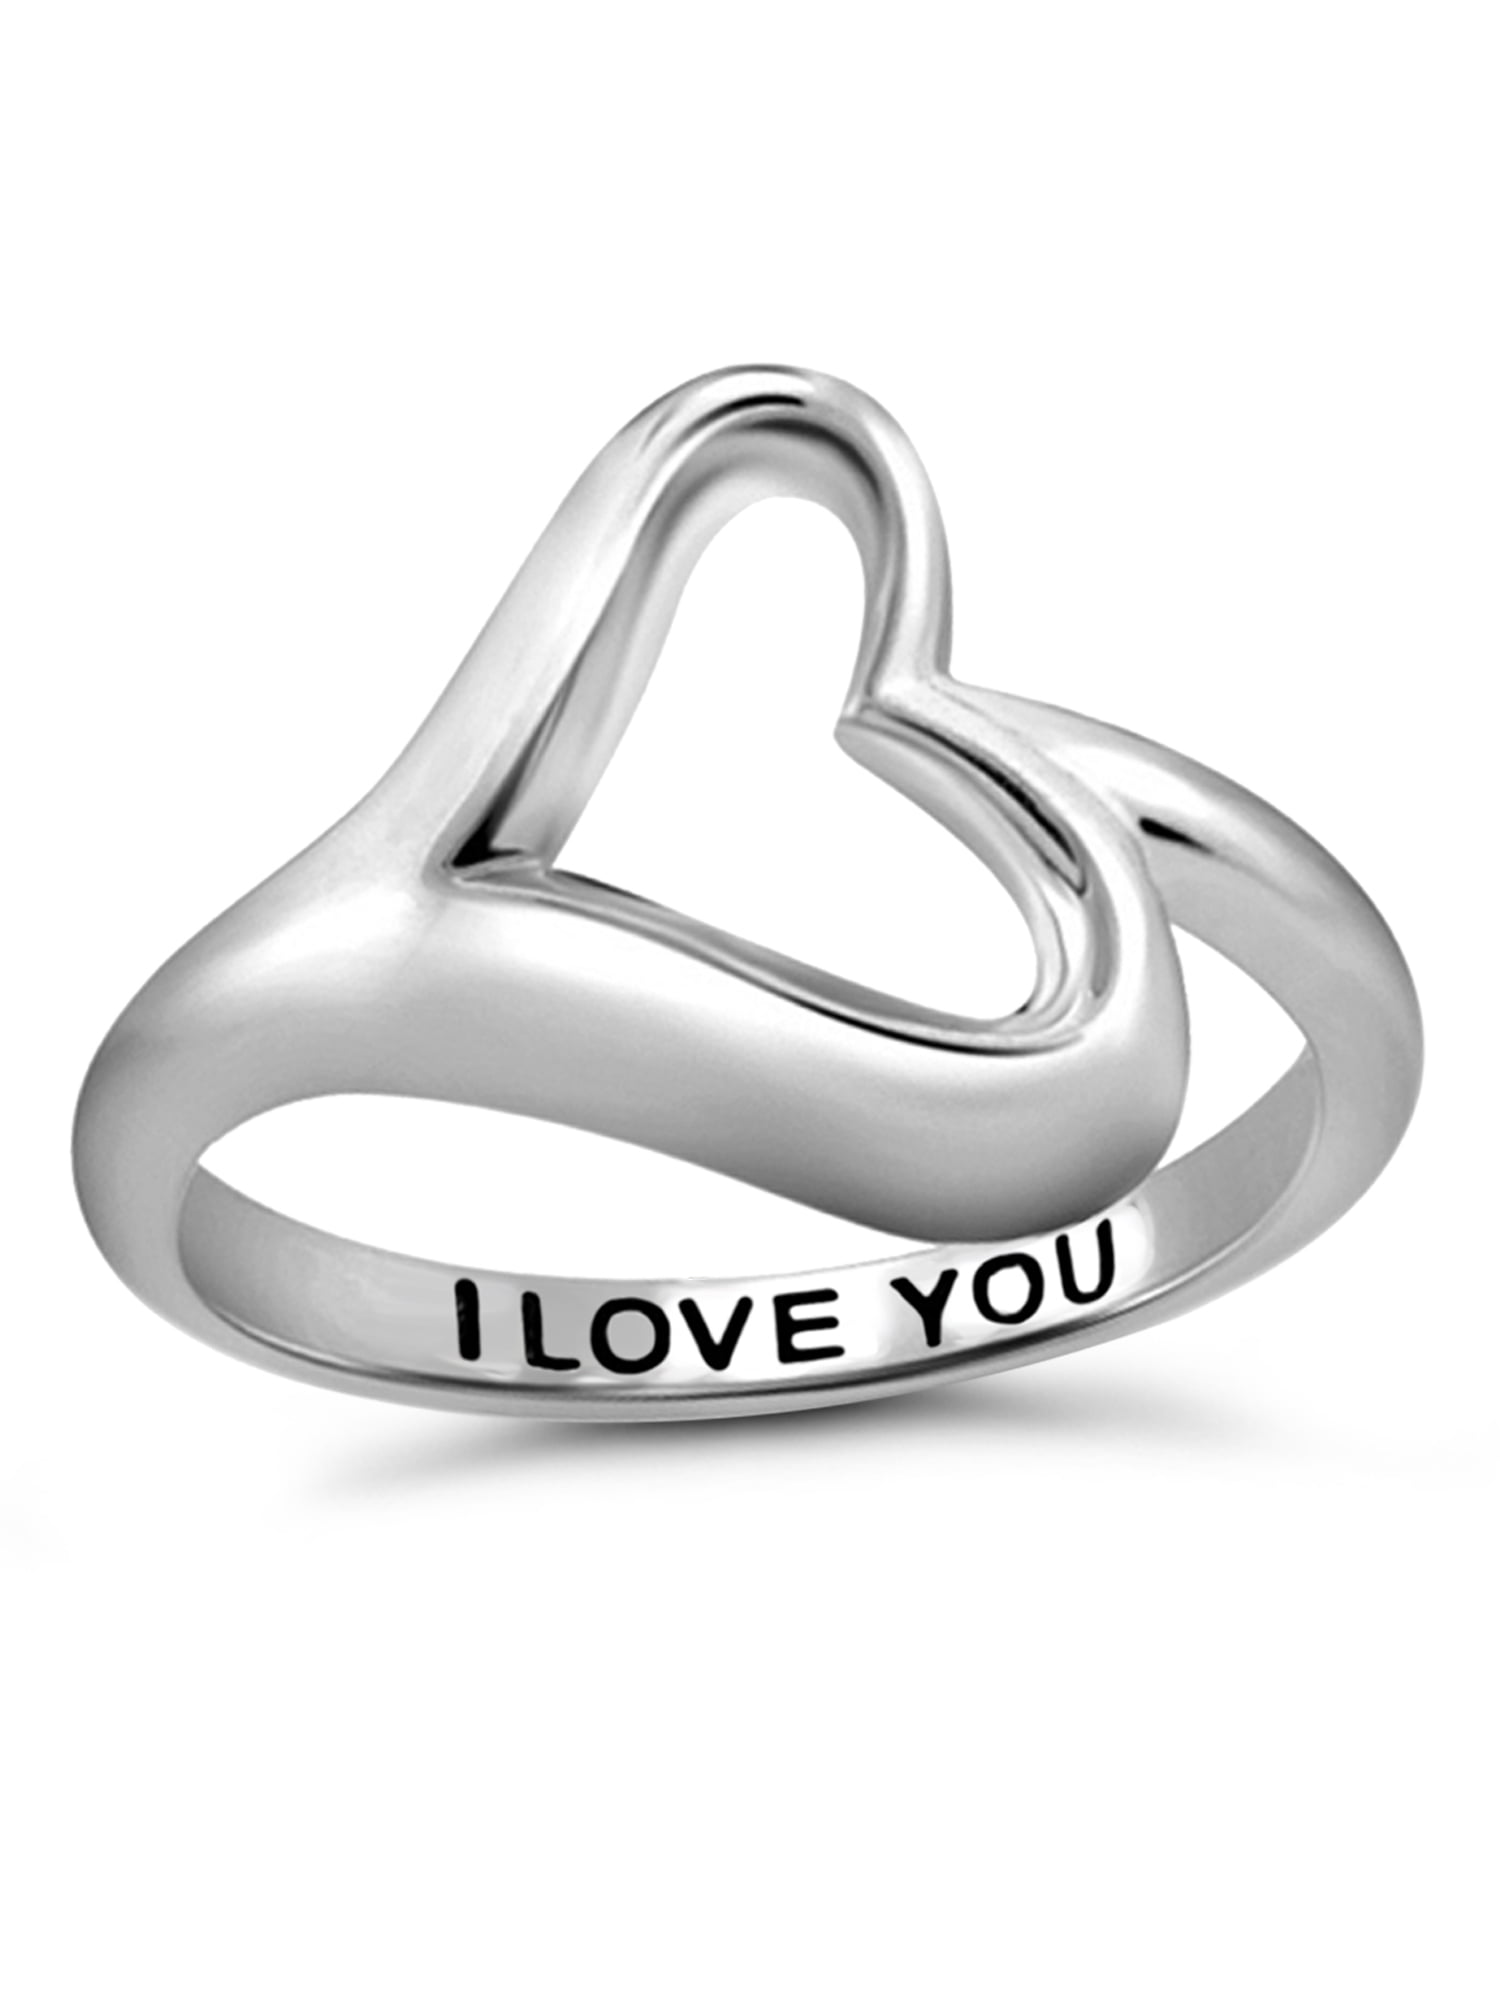 Buy BS BLOOMSTYLE 925 Original Silver Dual Heart Infinity Love Heart Ring  for Women and Girls at Amazon.in